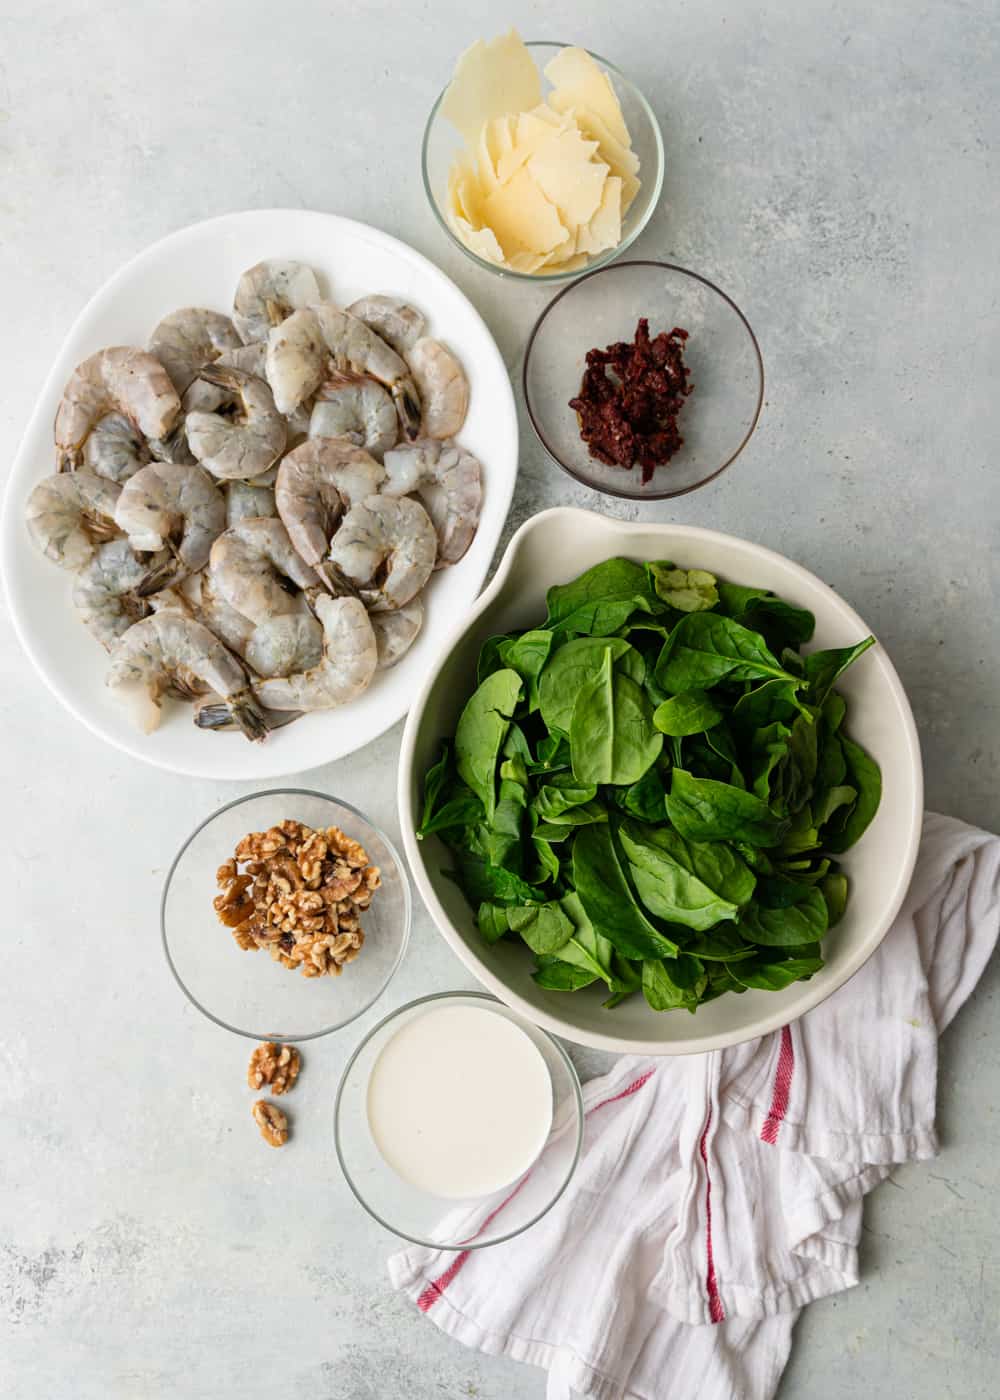 ingredients for an easy shrimp recipe, including shrimp, spinach, parmesan, sun dried tomatoes and walnuts